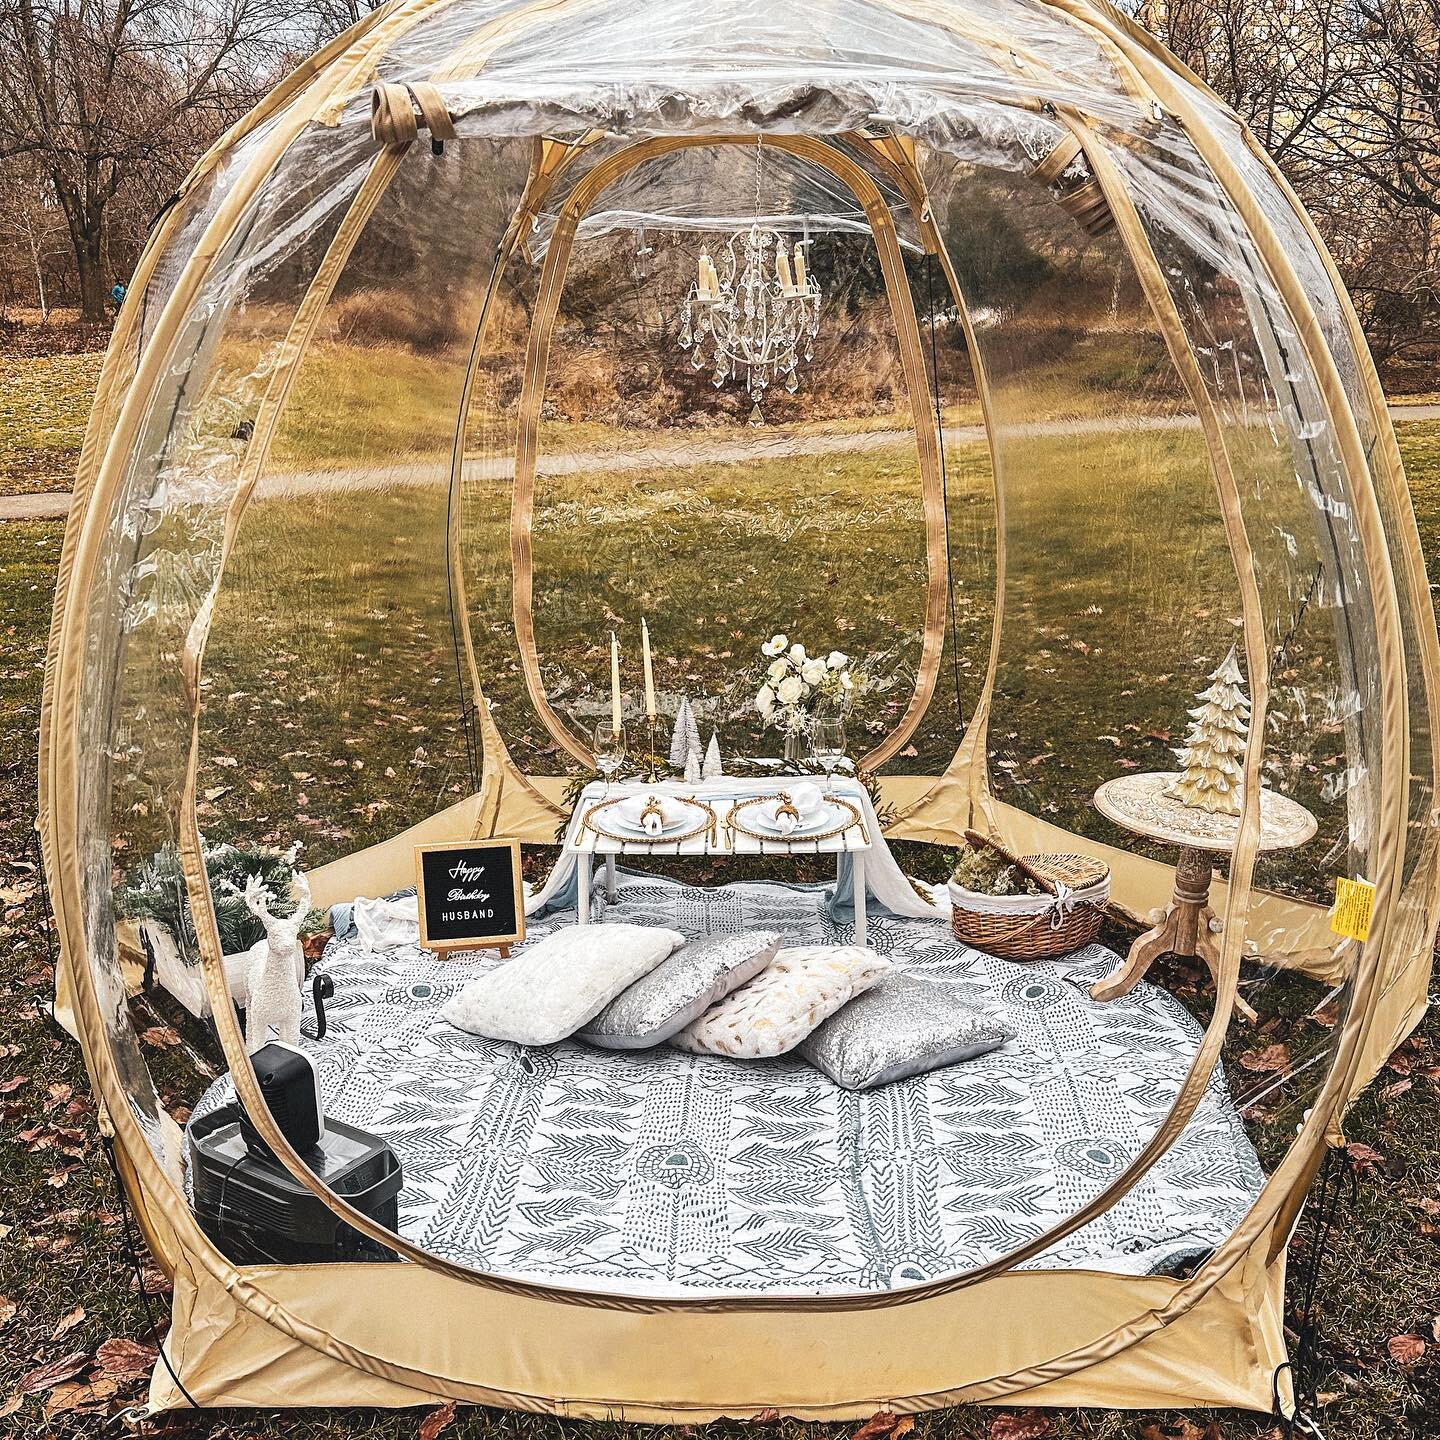 Our enchanting bubble 🫧 tents are back this winter season, providing you with a cozy haven in the midst of the cold. ❄️ It includes a portable heater that's powered by our trusty power bank, ensuring your warmth and comfort throughout your luxury pi